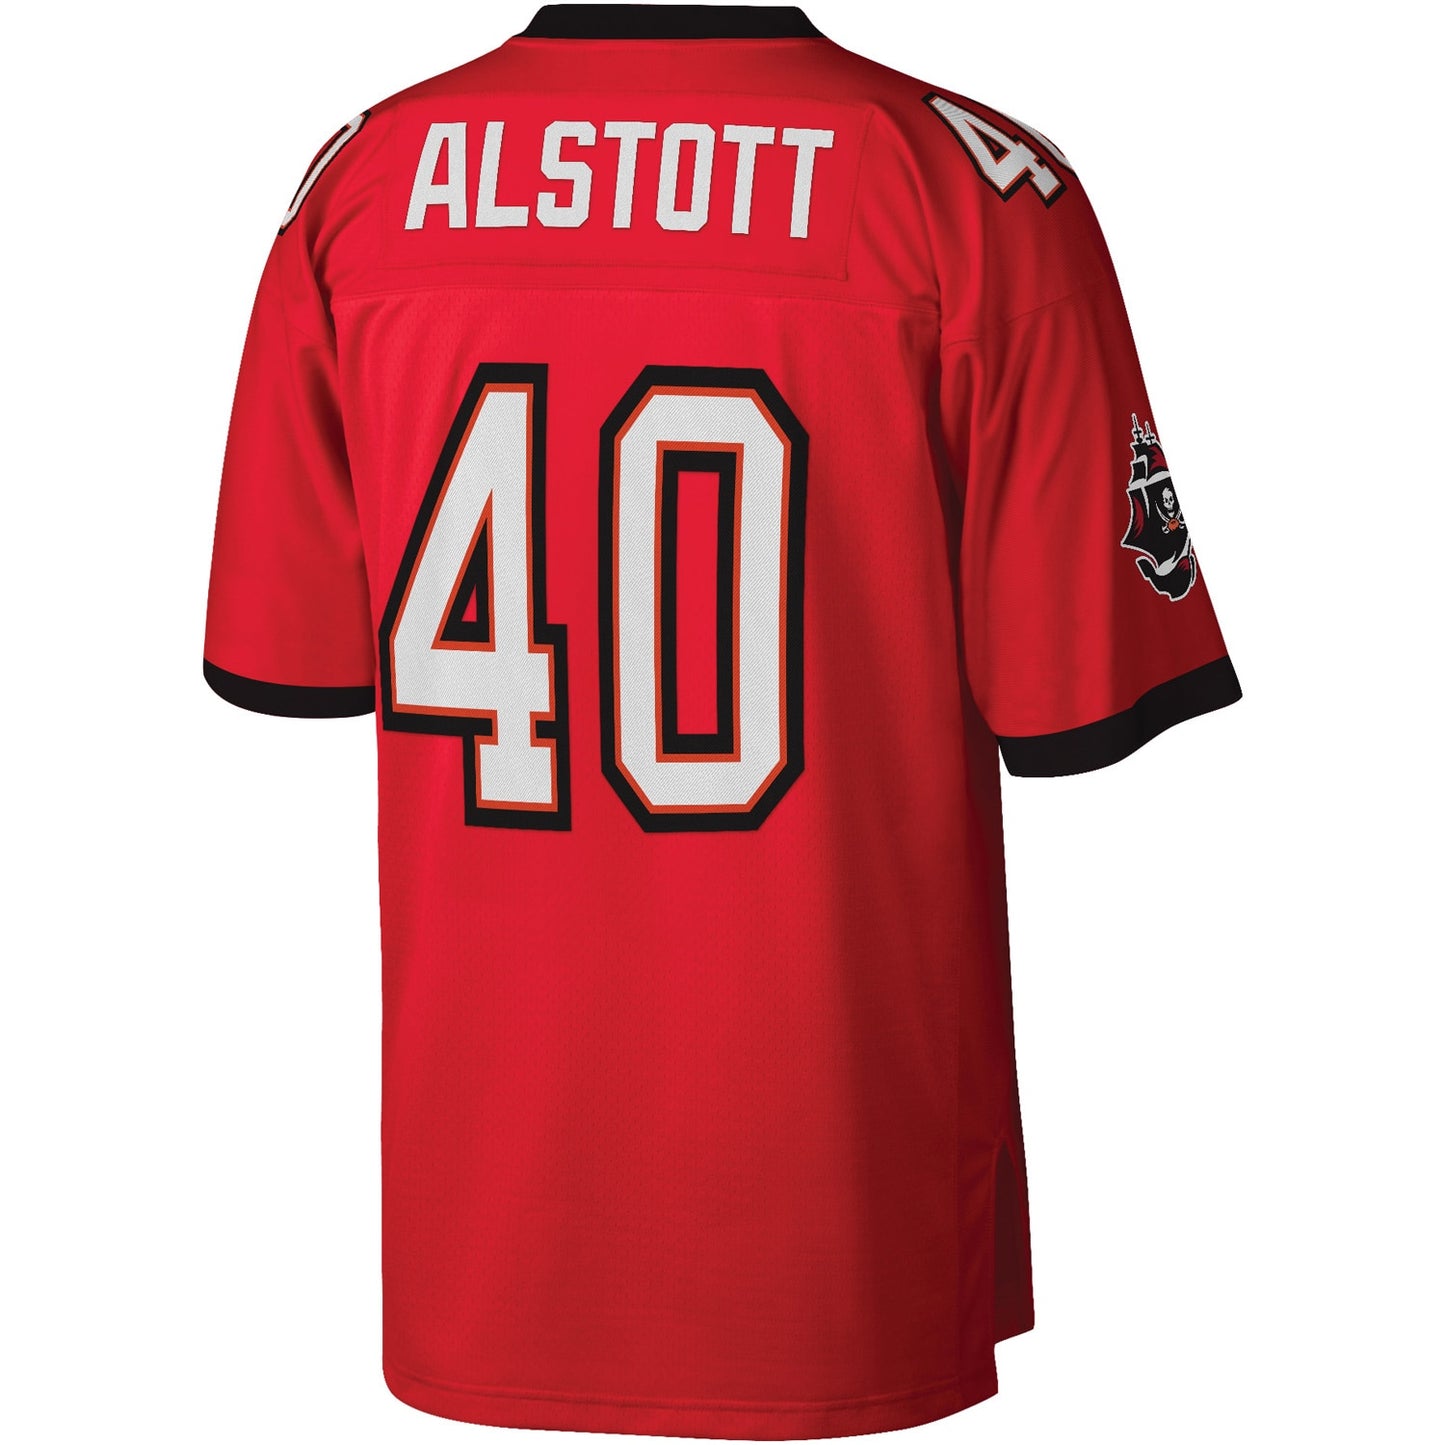 Mike Alstott Tampa Bay Buccaneers Mitchell & Ness Legacy Replica Jersey - Red